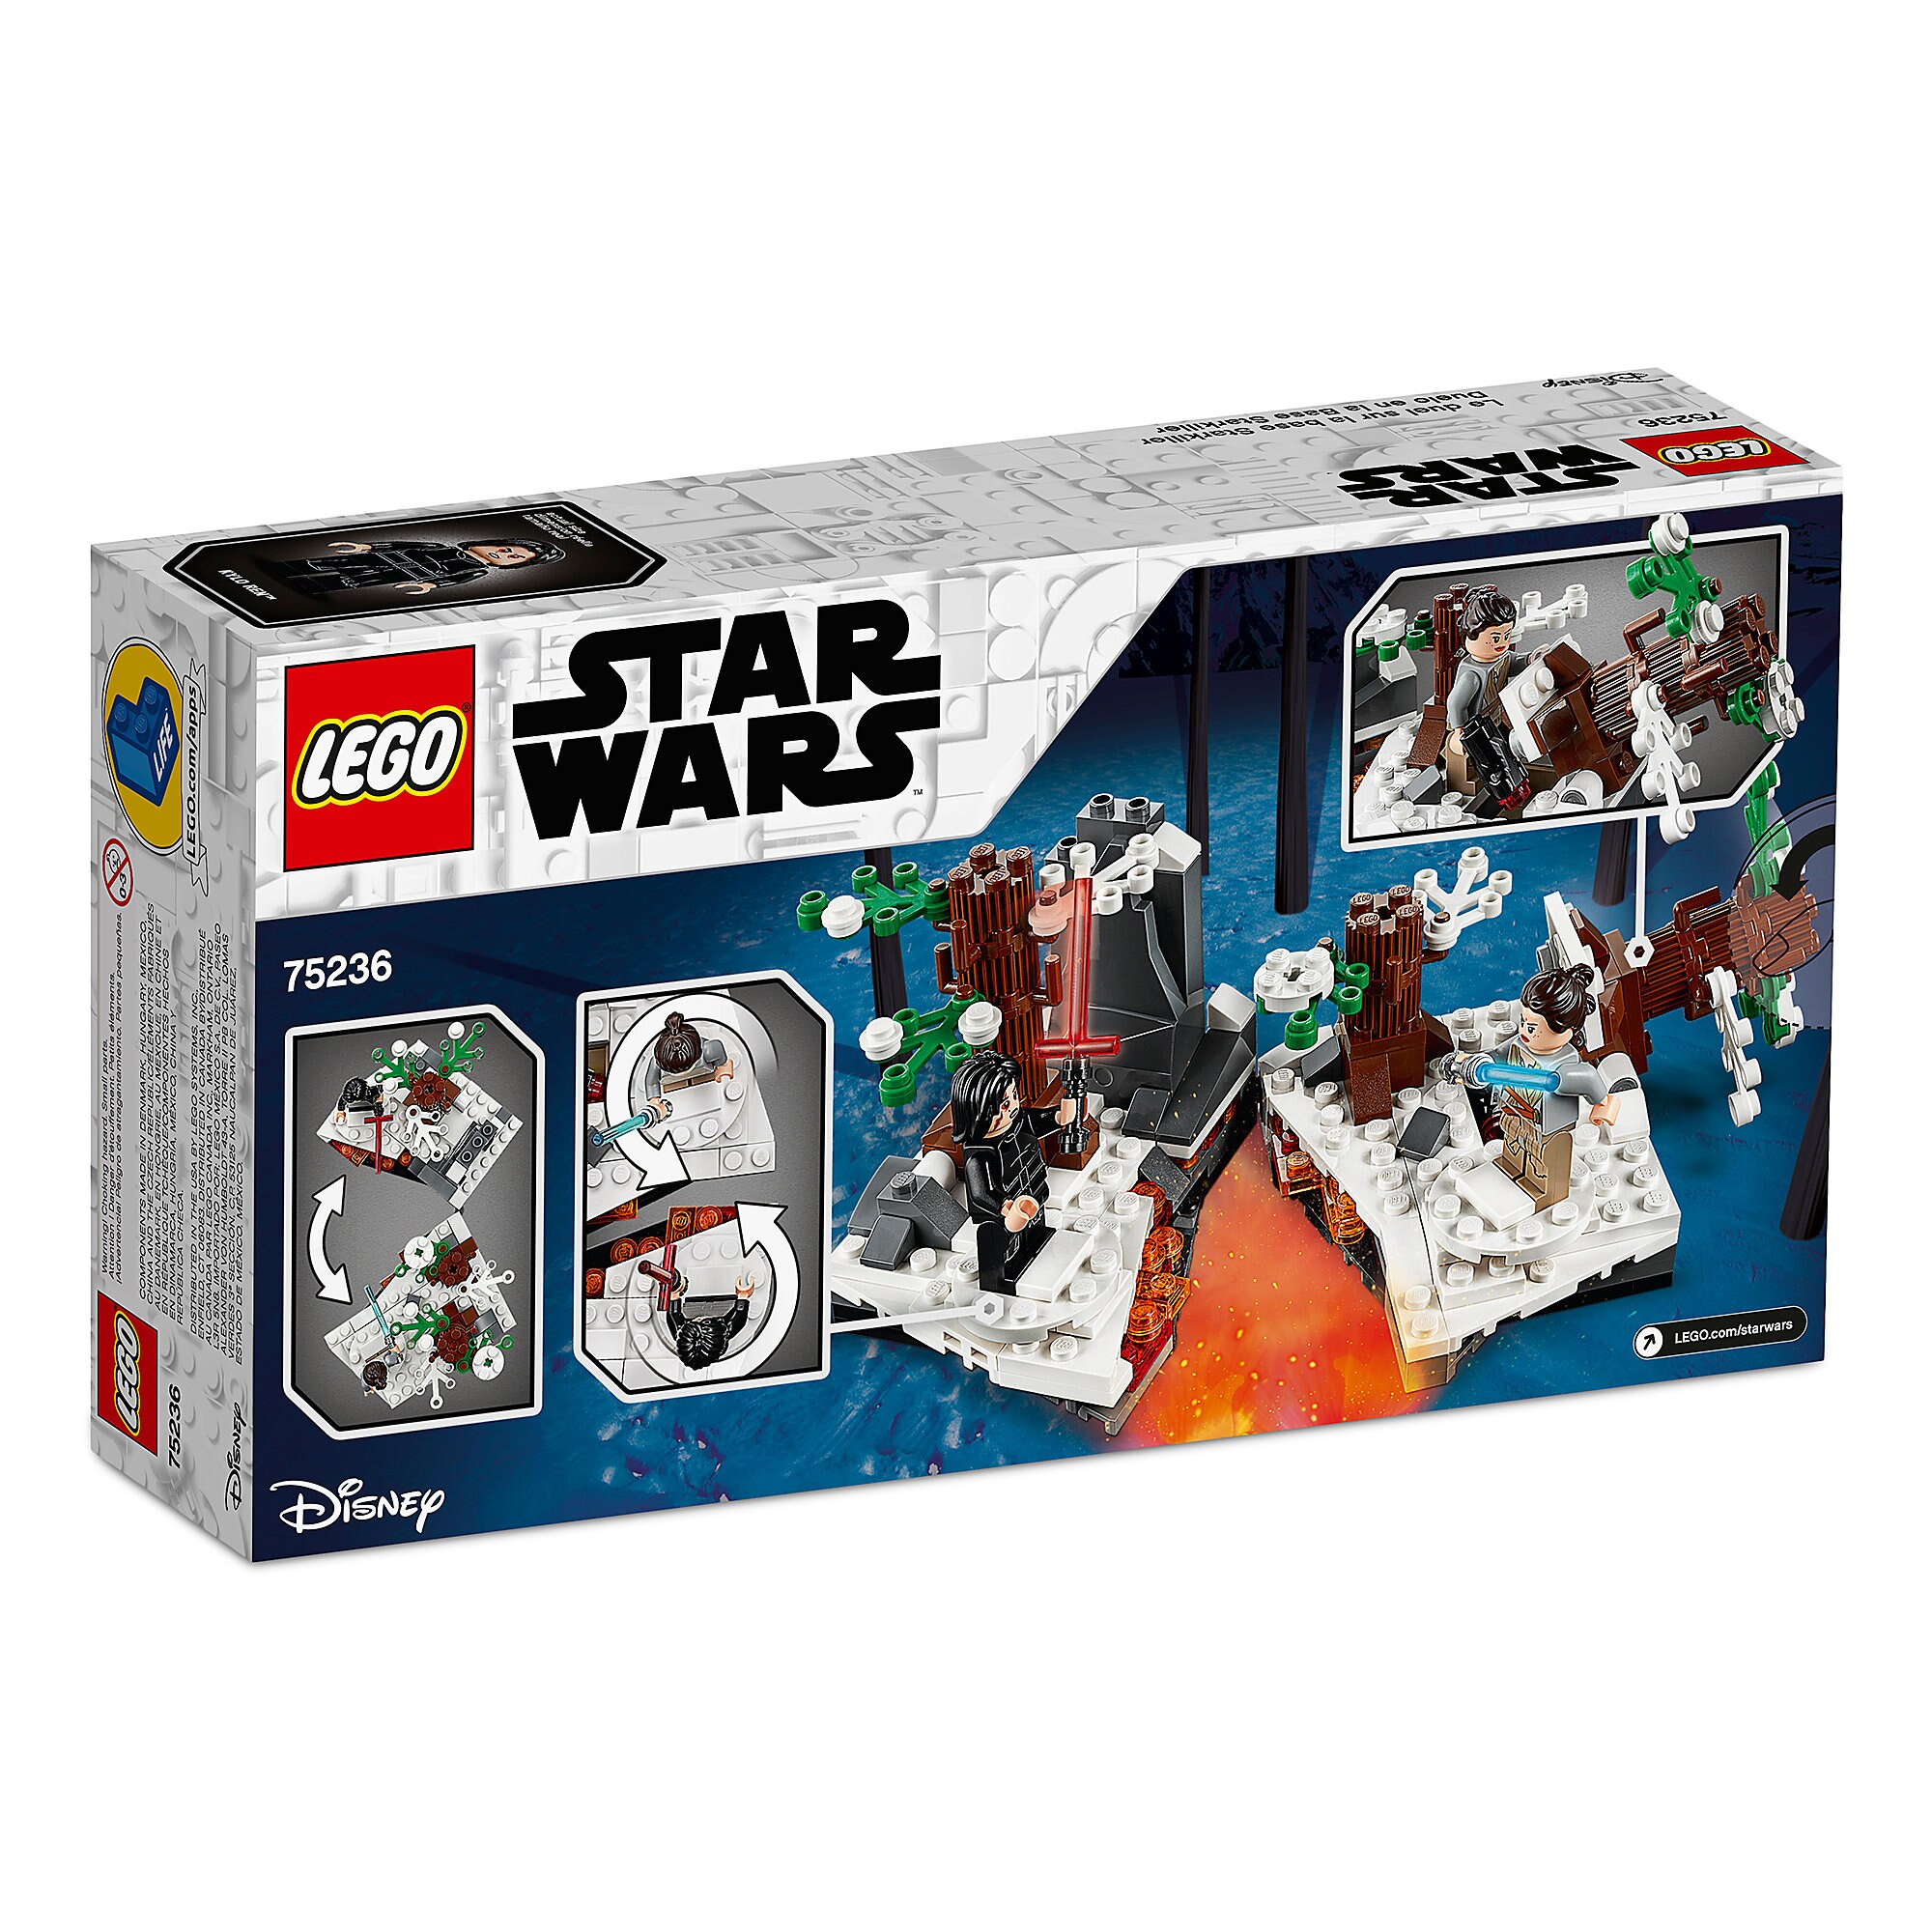 Duel on Starkiller Base Play Set by LEGO - Star Wars: The Force Awakens